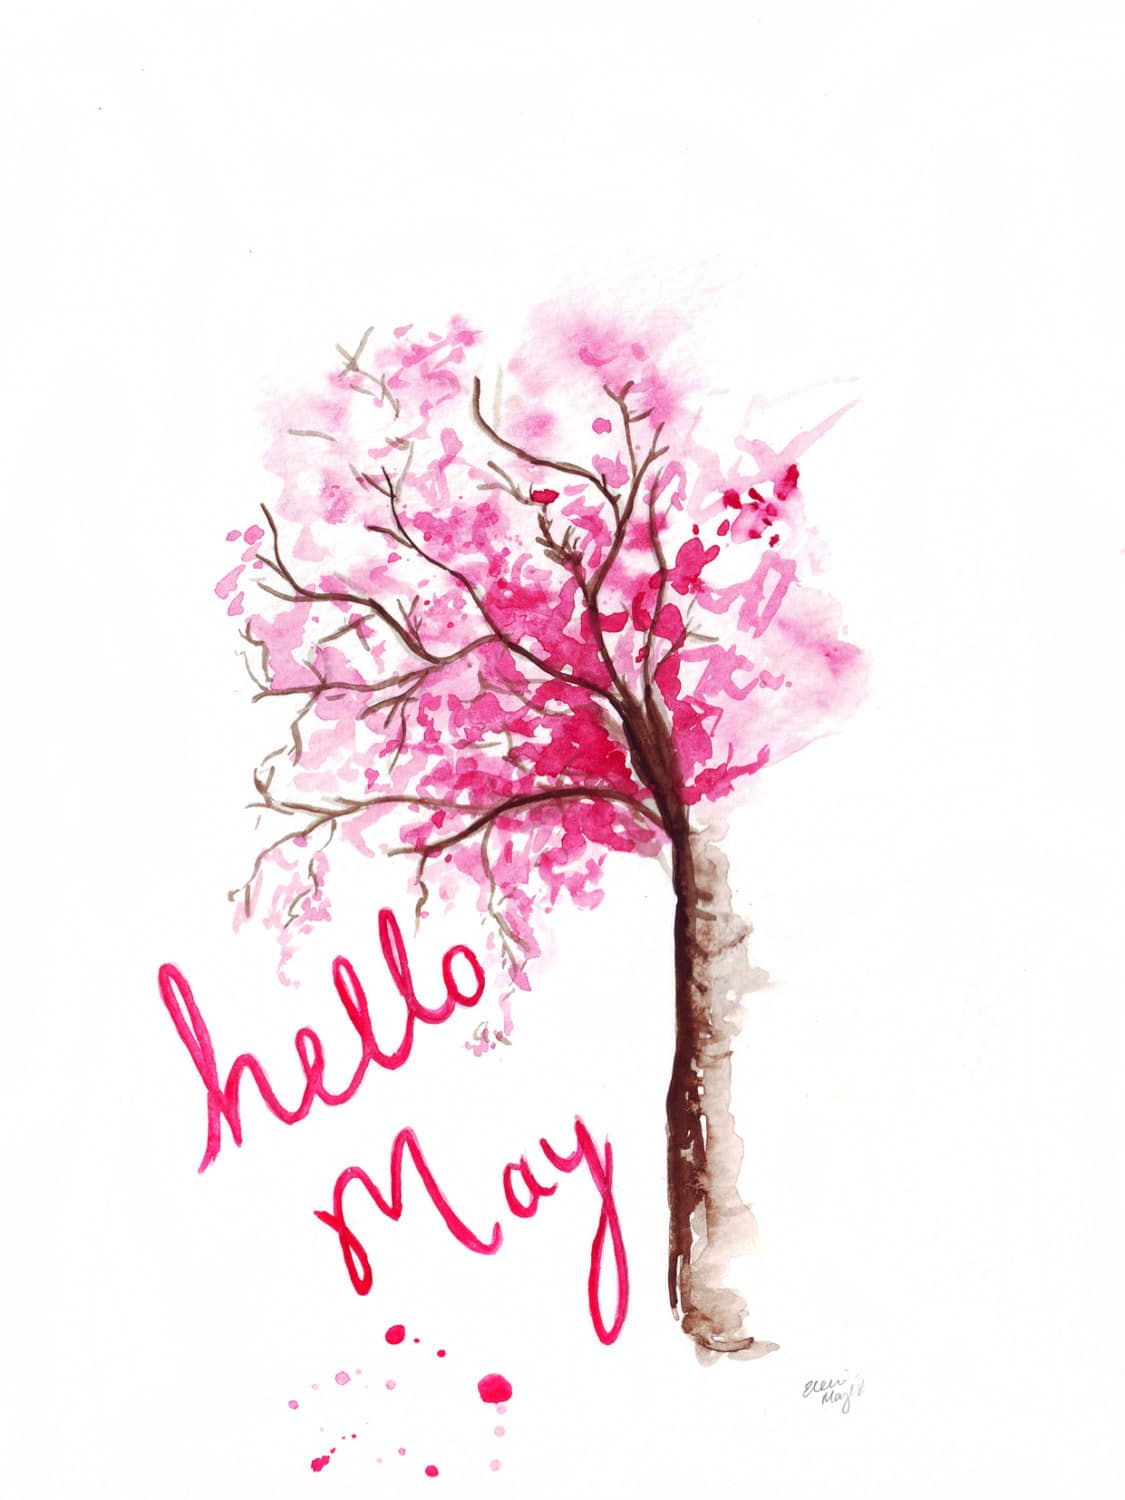 Hello May Quotes